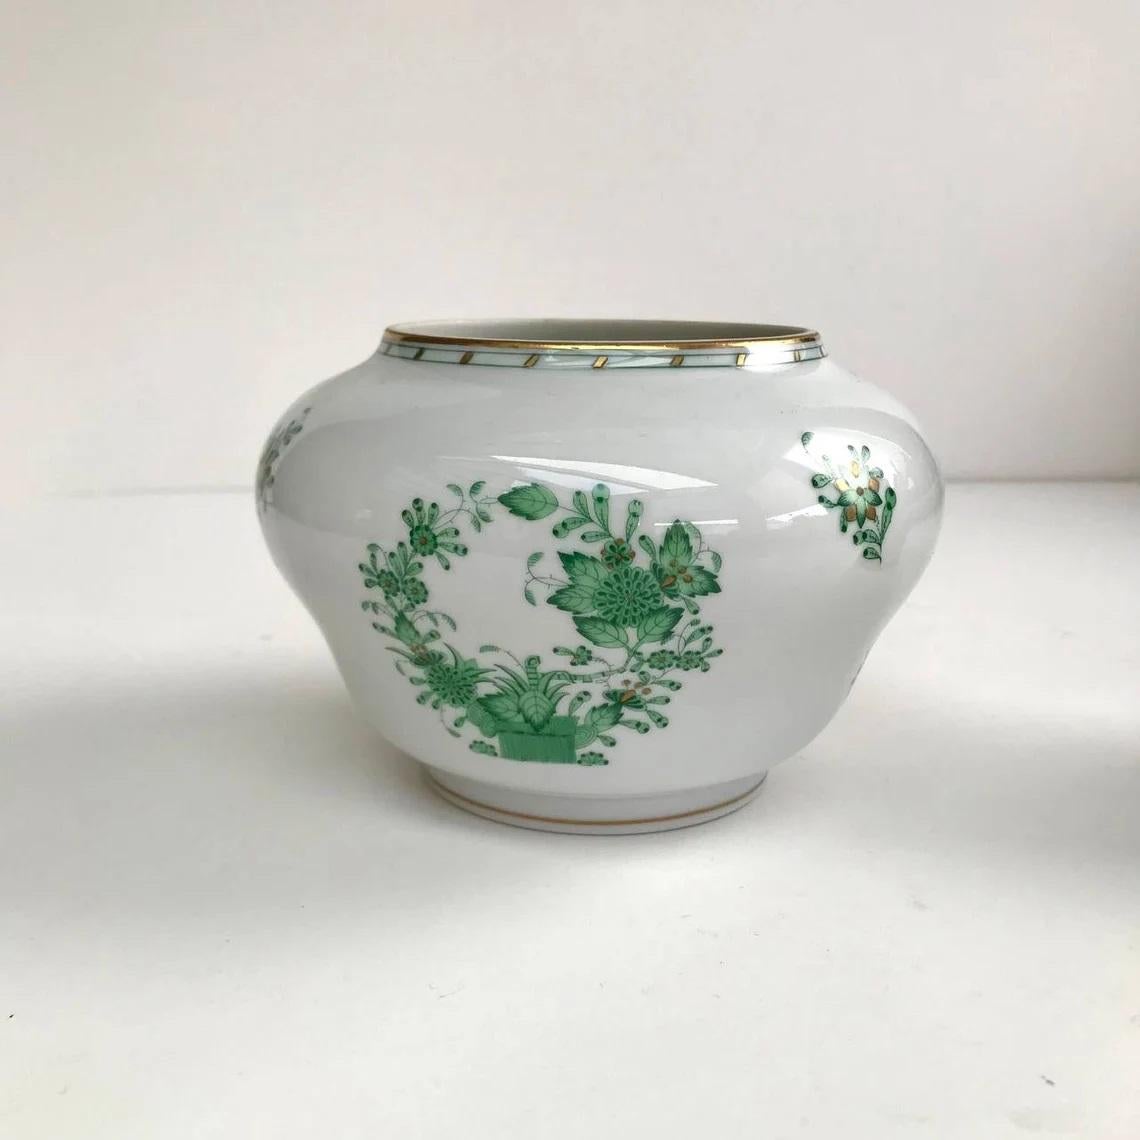 Herend green floral vase.

Herend - a supplier to the Royal Court of England.

Vase for Flowers.

Hungary.

Porcelain.

Vintage.

Hand-painted.

In excellent condition, no chips, cracks or crazing.

Size:

Height - 4.3 inc 11